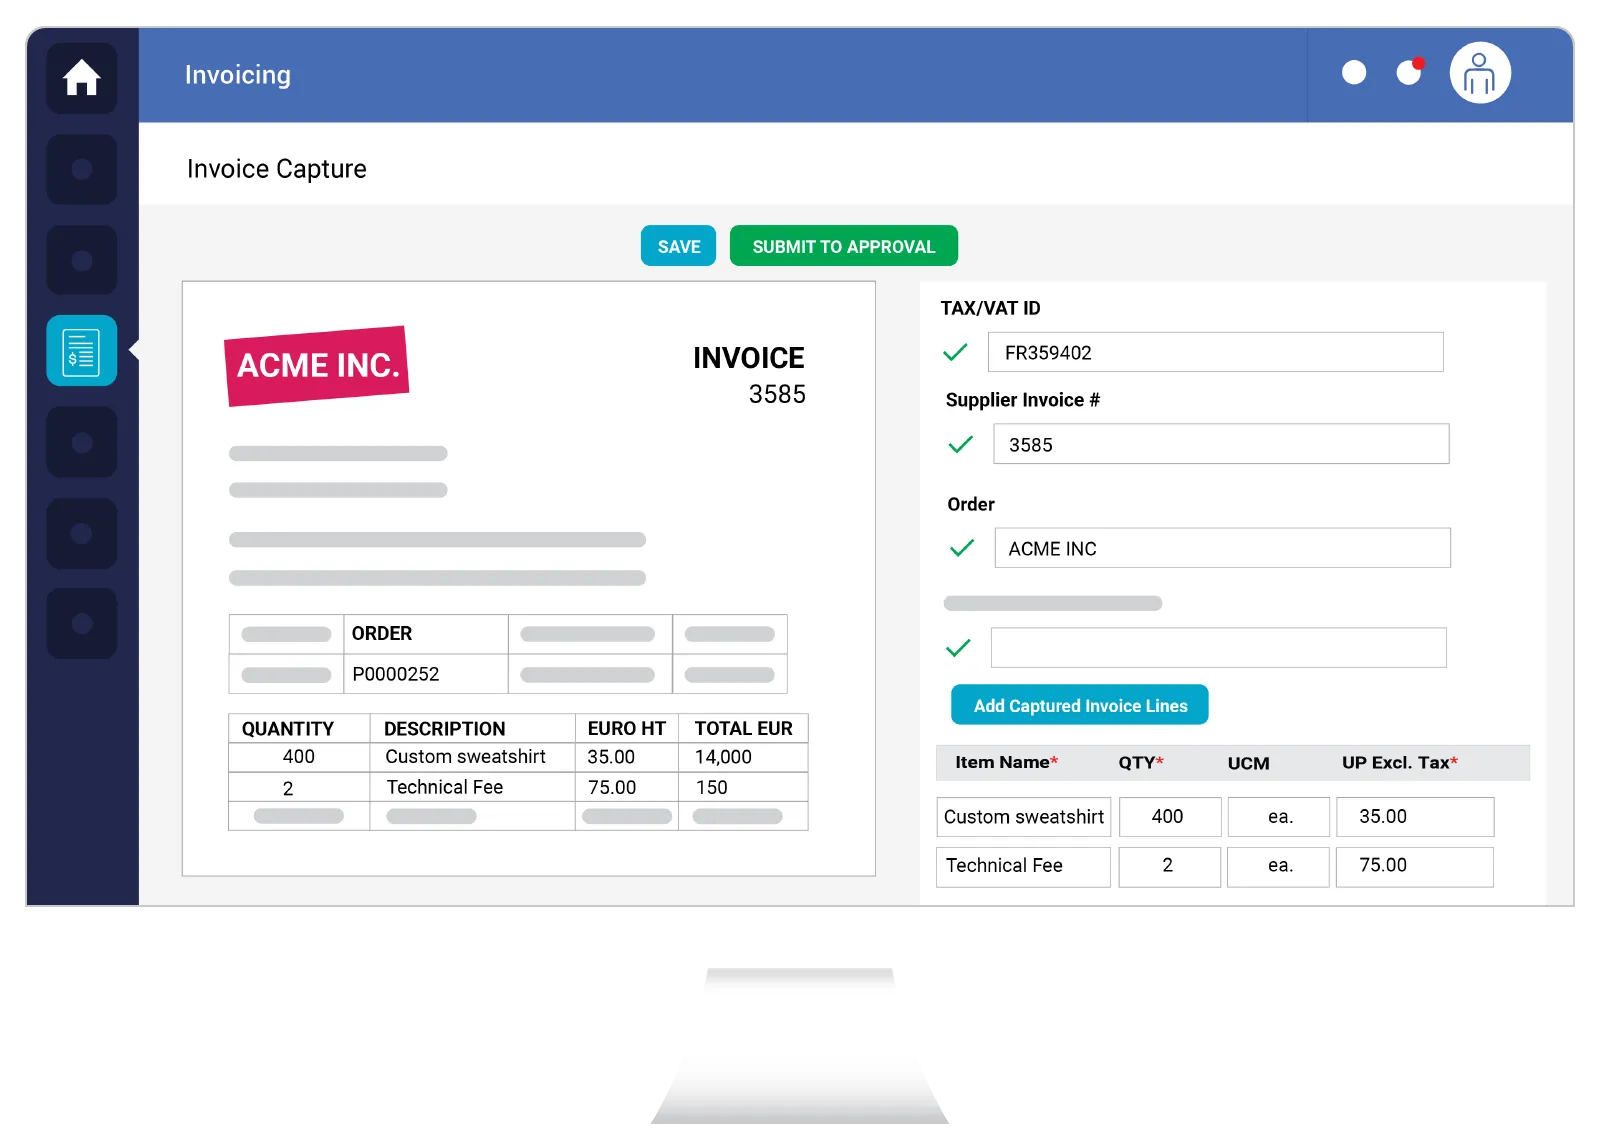 Invoicing: Accounts Payable Digitization and Compliance
- Receive all invoices from PDF email to EDI without hidden fees
- Supplier pre-matching in a free supplier portal 
- Automate with intuitive 4-way matching and one-click approvals